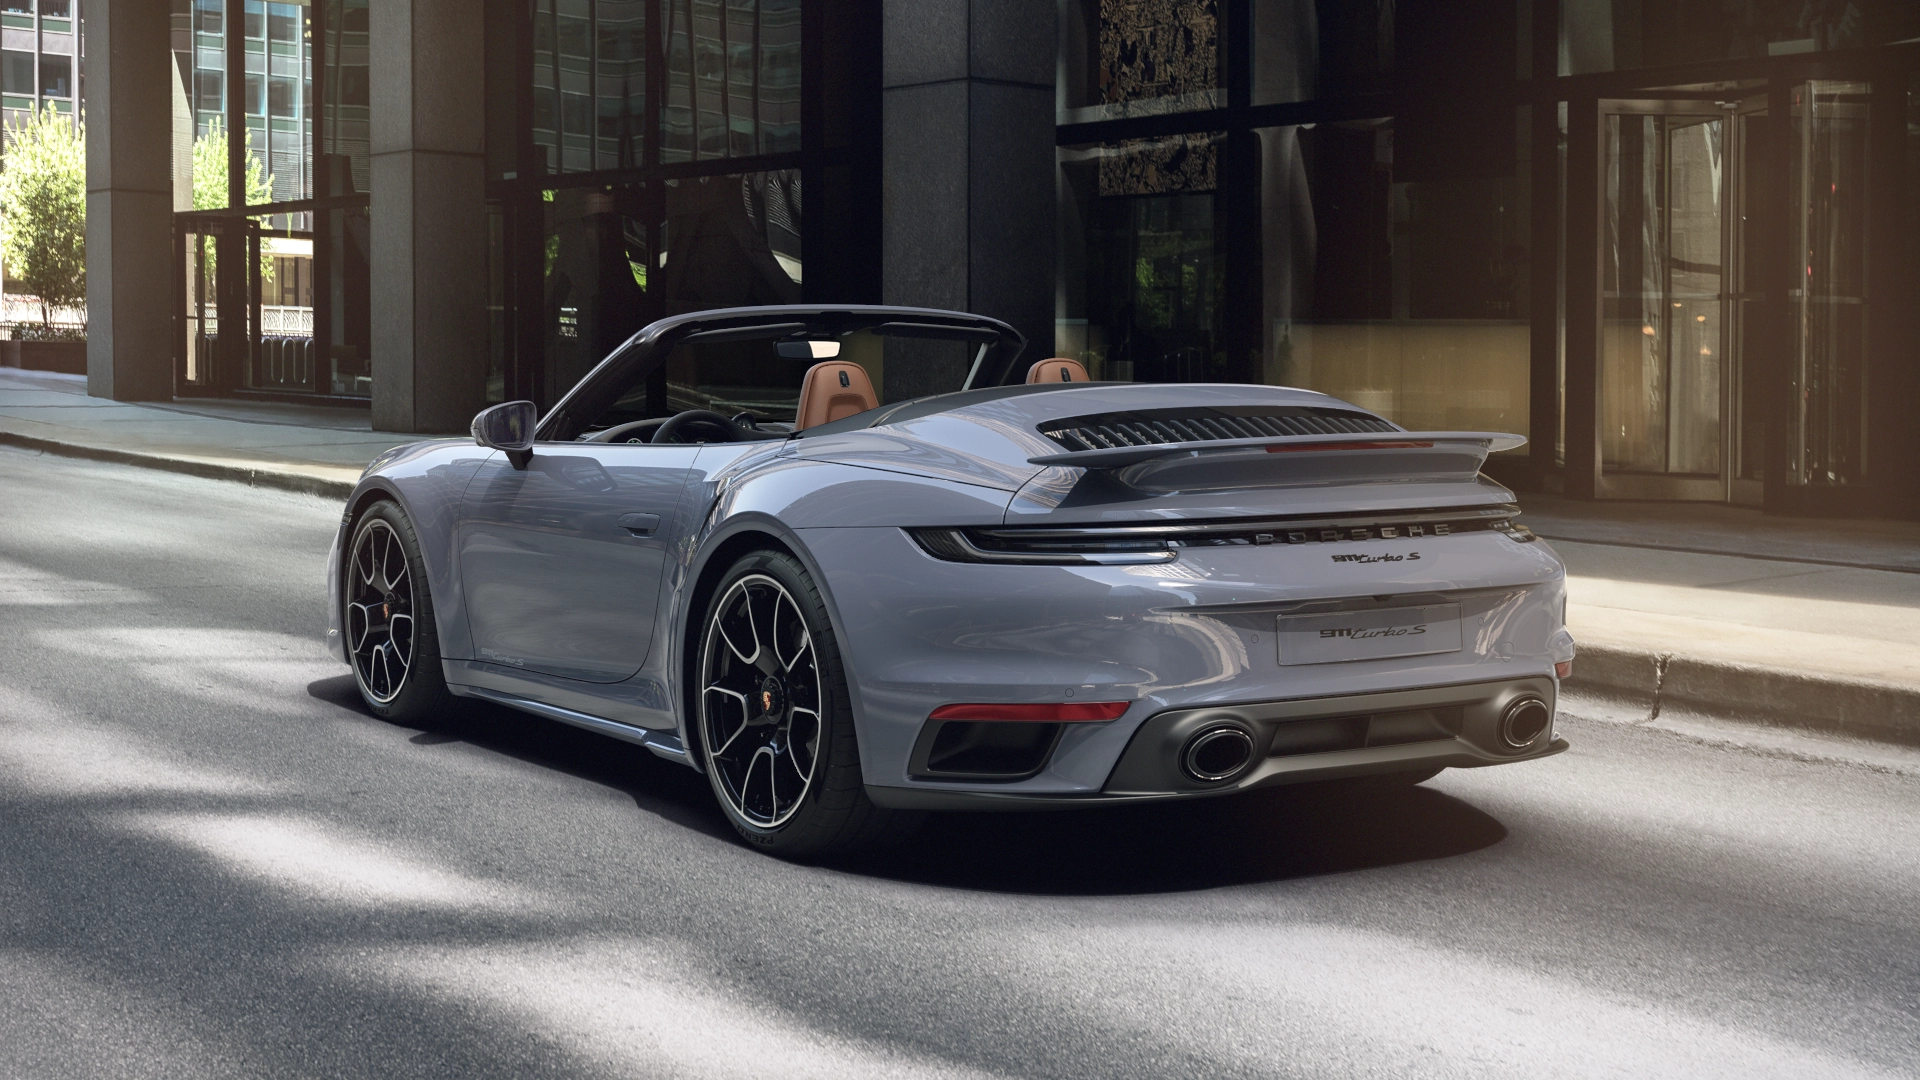 911 Turbo S Cabriolet back view